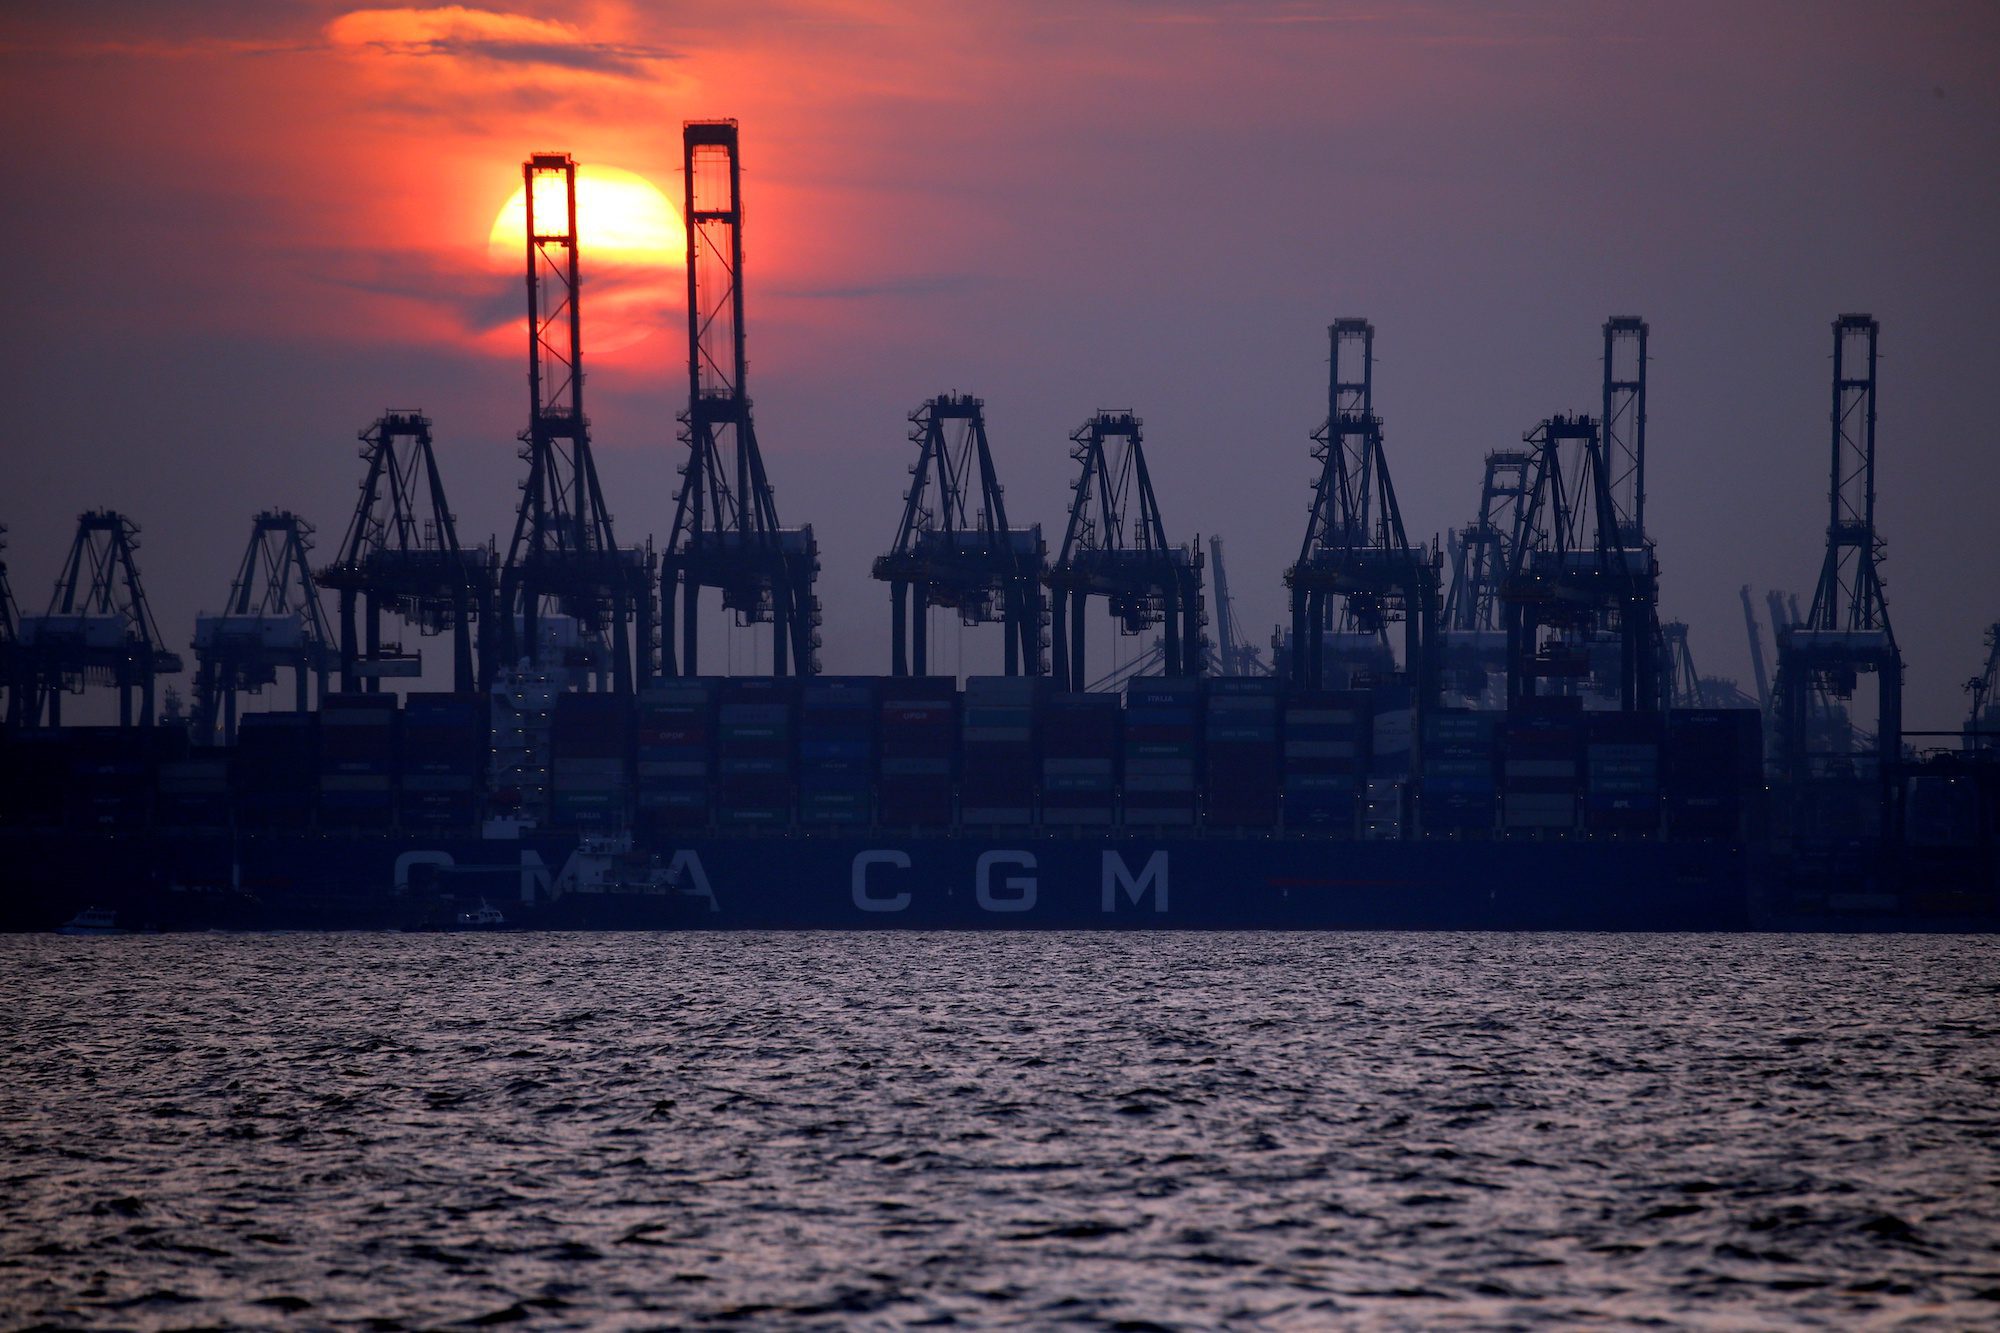 FILE PHOTO: Container cranes are pictured at the port of Singapore, June 10, 2018. REUTERS/Feline Lim/File Photo